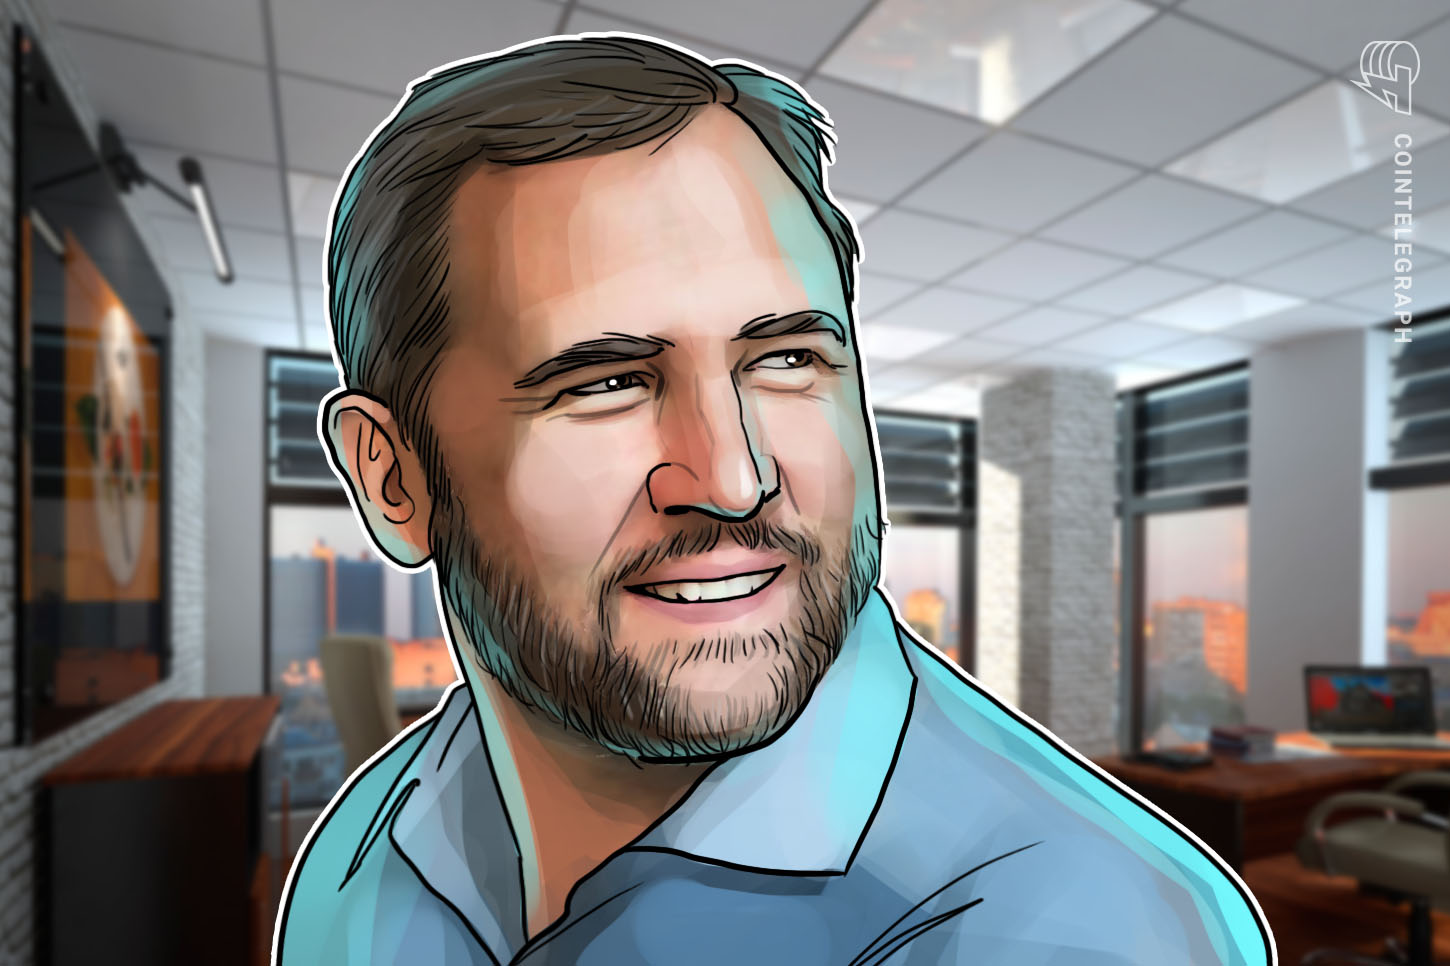 Ripple’s Garlinghouse disses Bitcoin’s power use upfront of Biden administration